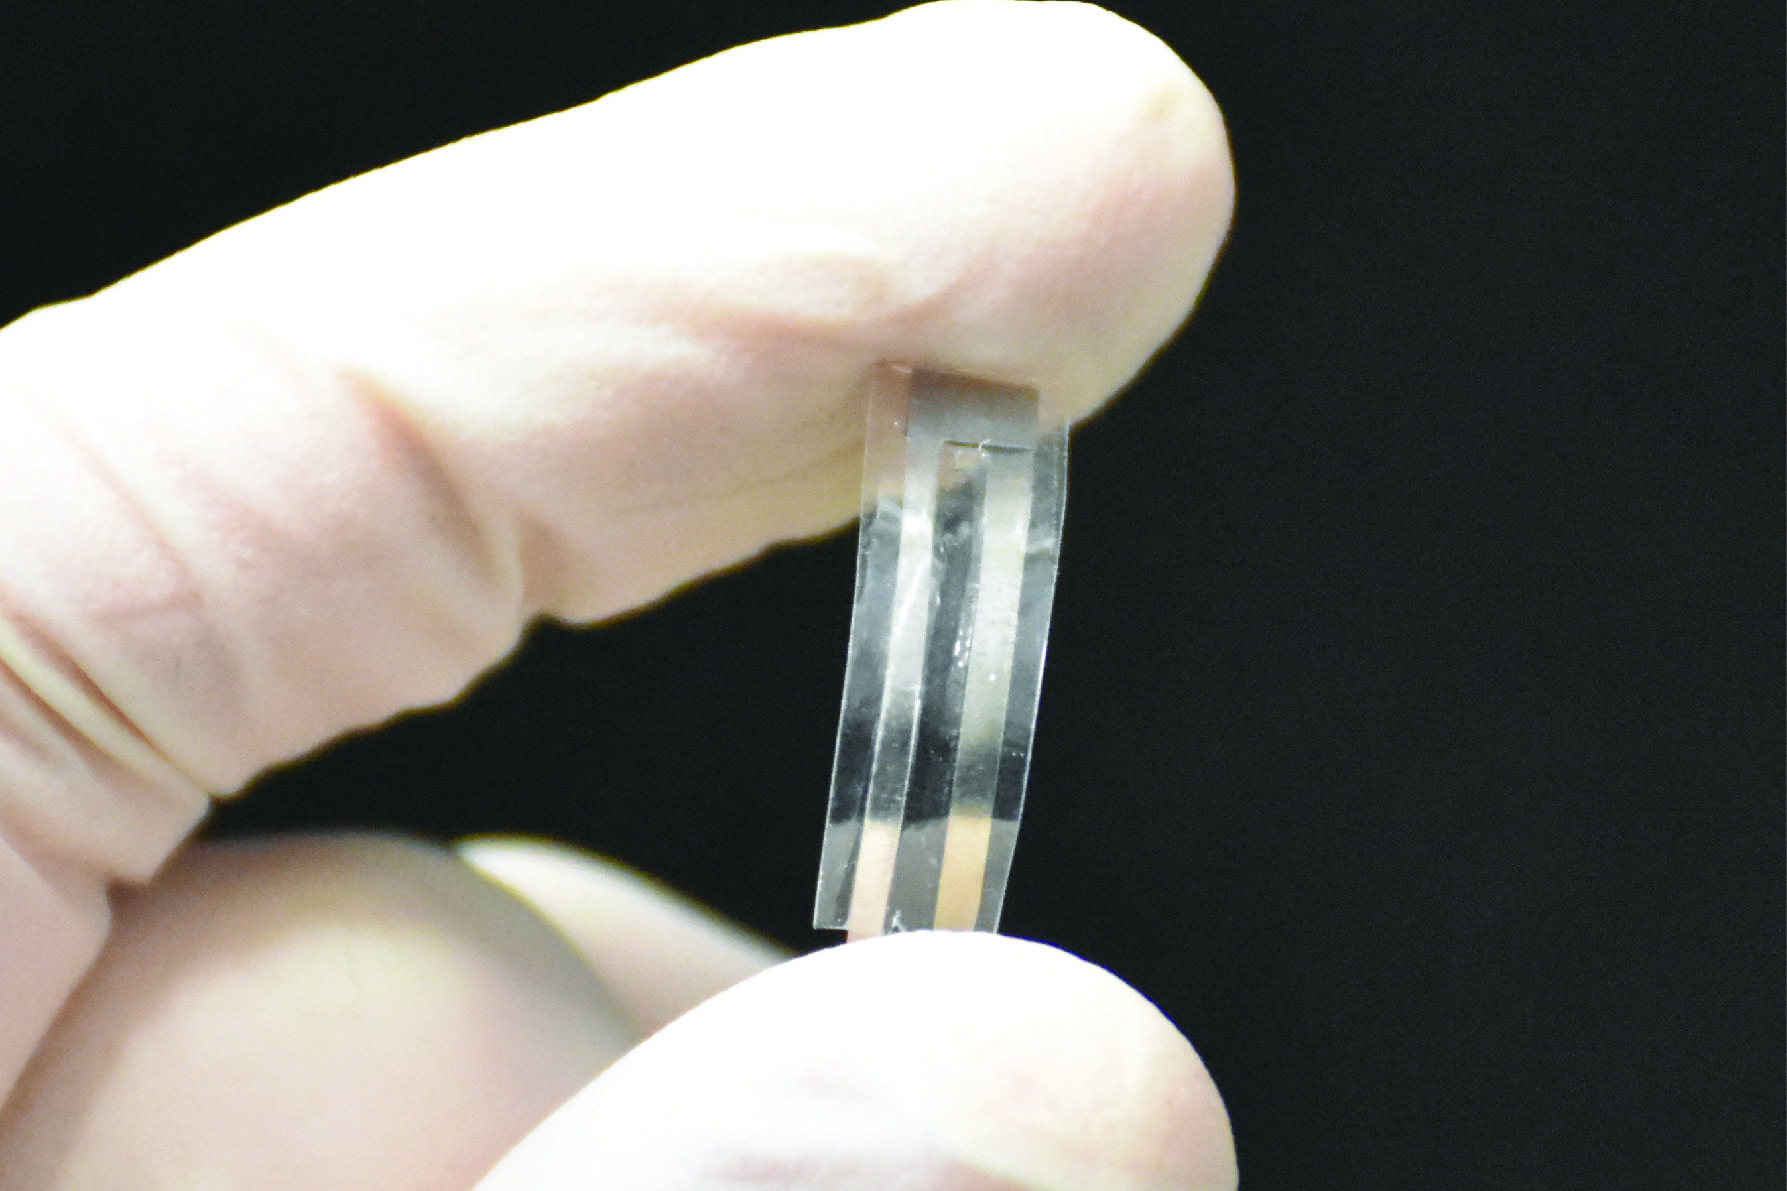 A biodegradable pressure sensor that could help doctors monitor medical conditions before dissolving harmlessly in a patient’s body